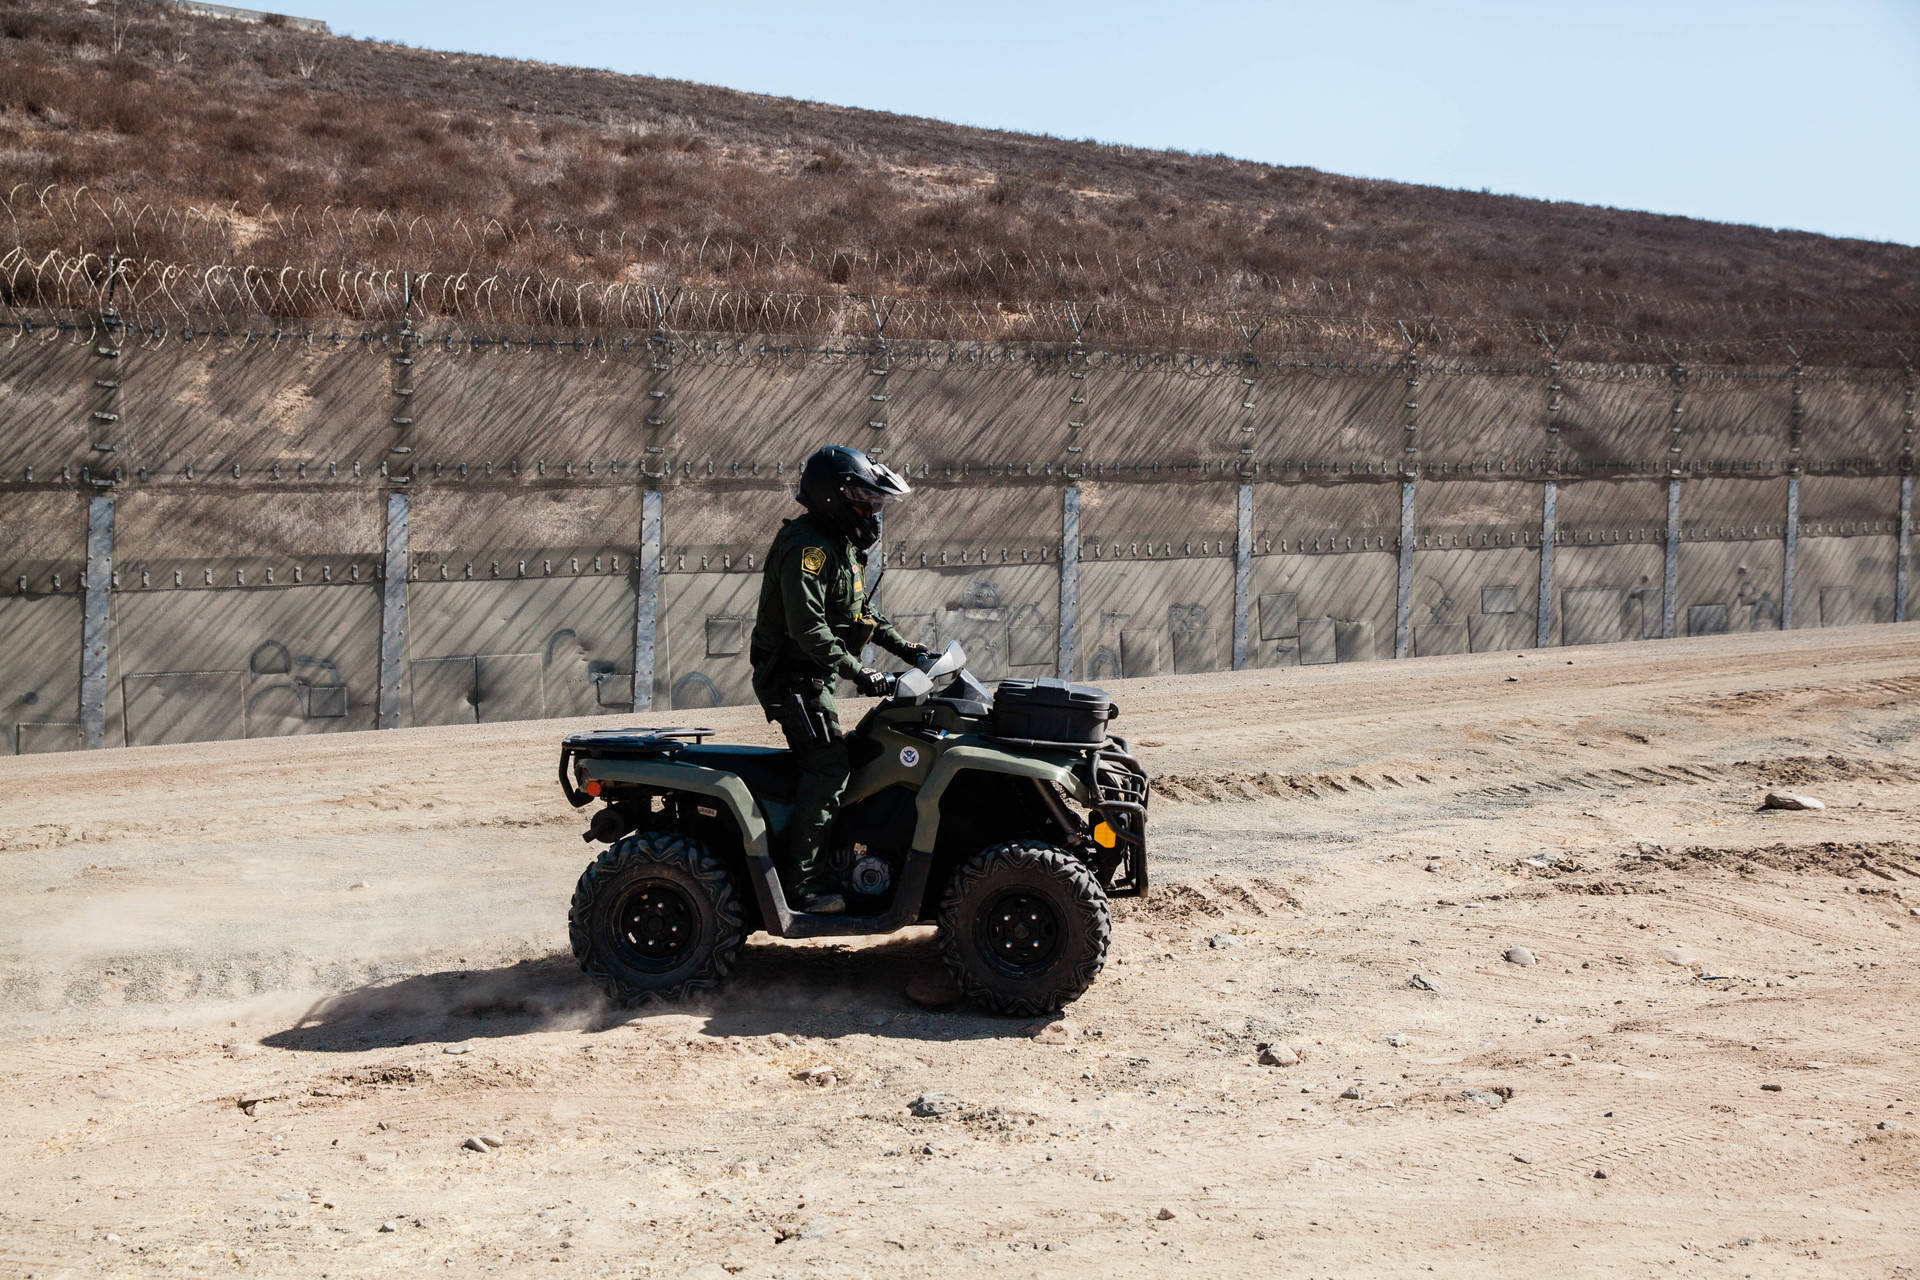 U.S. Border Patrol polices Goat Canyon area near the border wall that divides the United States and Mexico. Ariana Drehsler